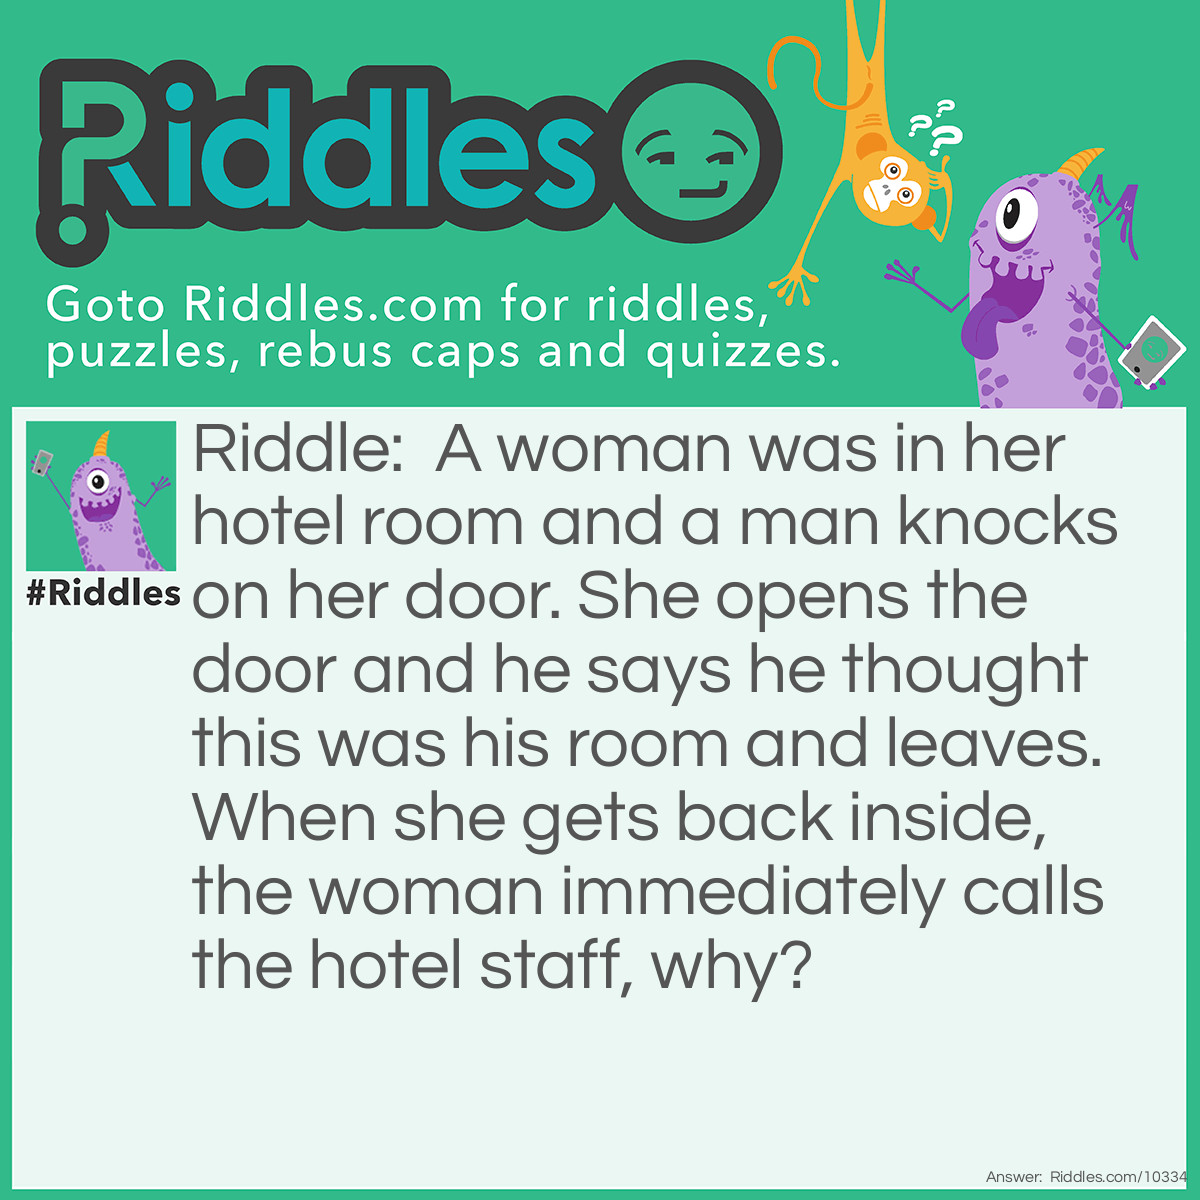 Riddle: A woman was in her hotel room and a man knocks on her door. She opens the door and he says he thought this was his room and leaves. When she gets back inside, the woman immediately calls the hotel staff, why? Answer: You don’t knock on your own door, but the man did.